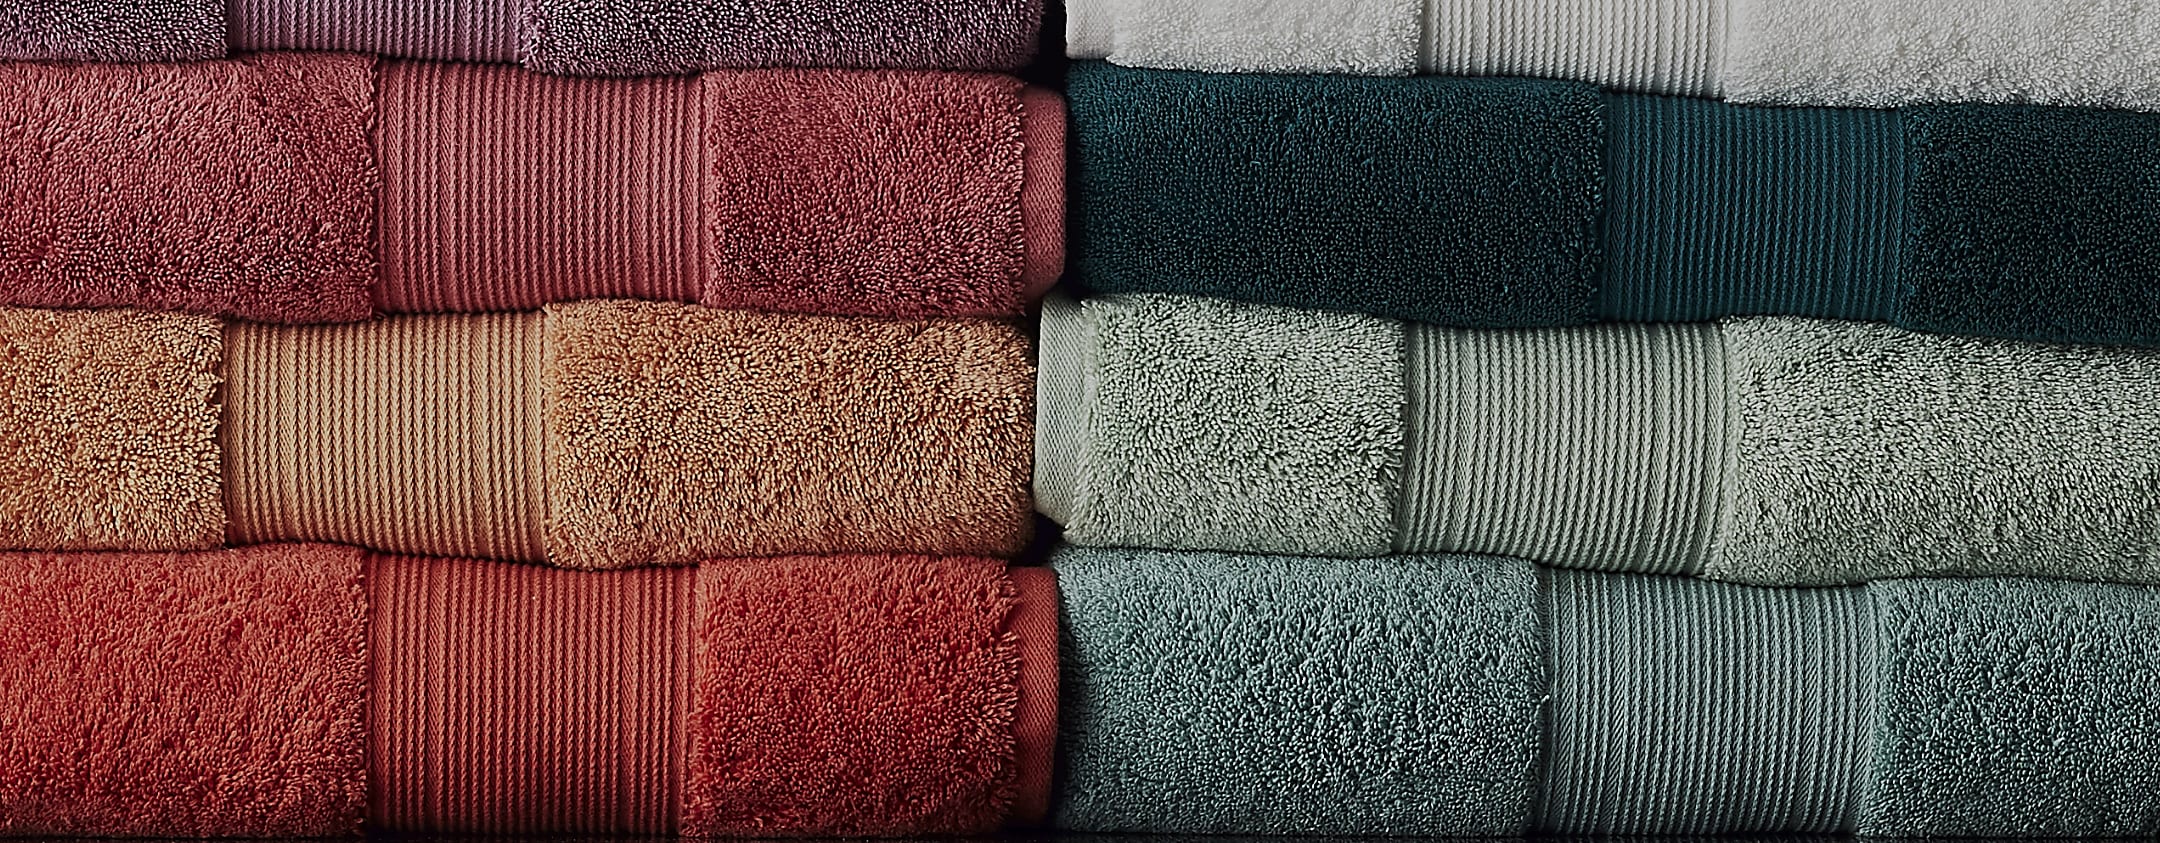 fold and store towels